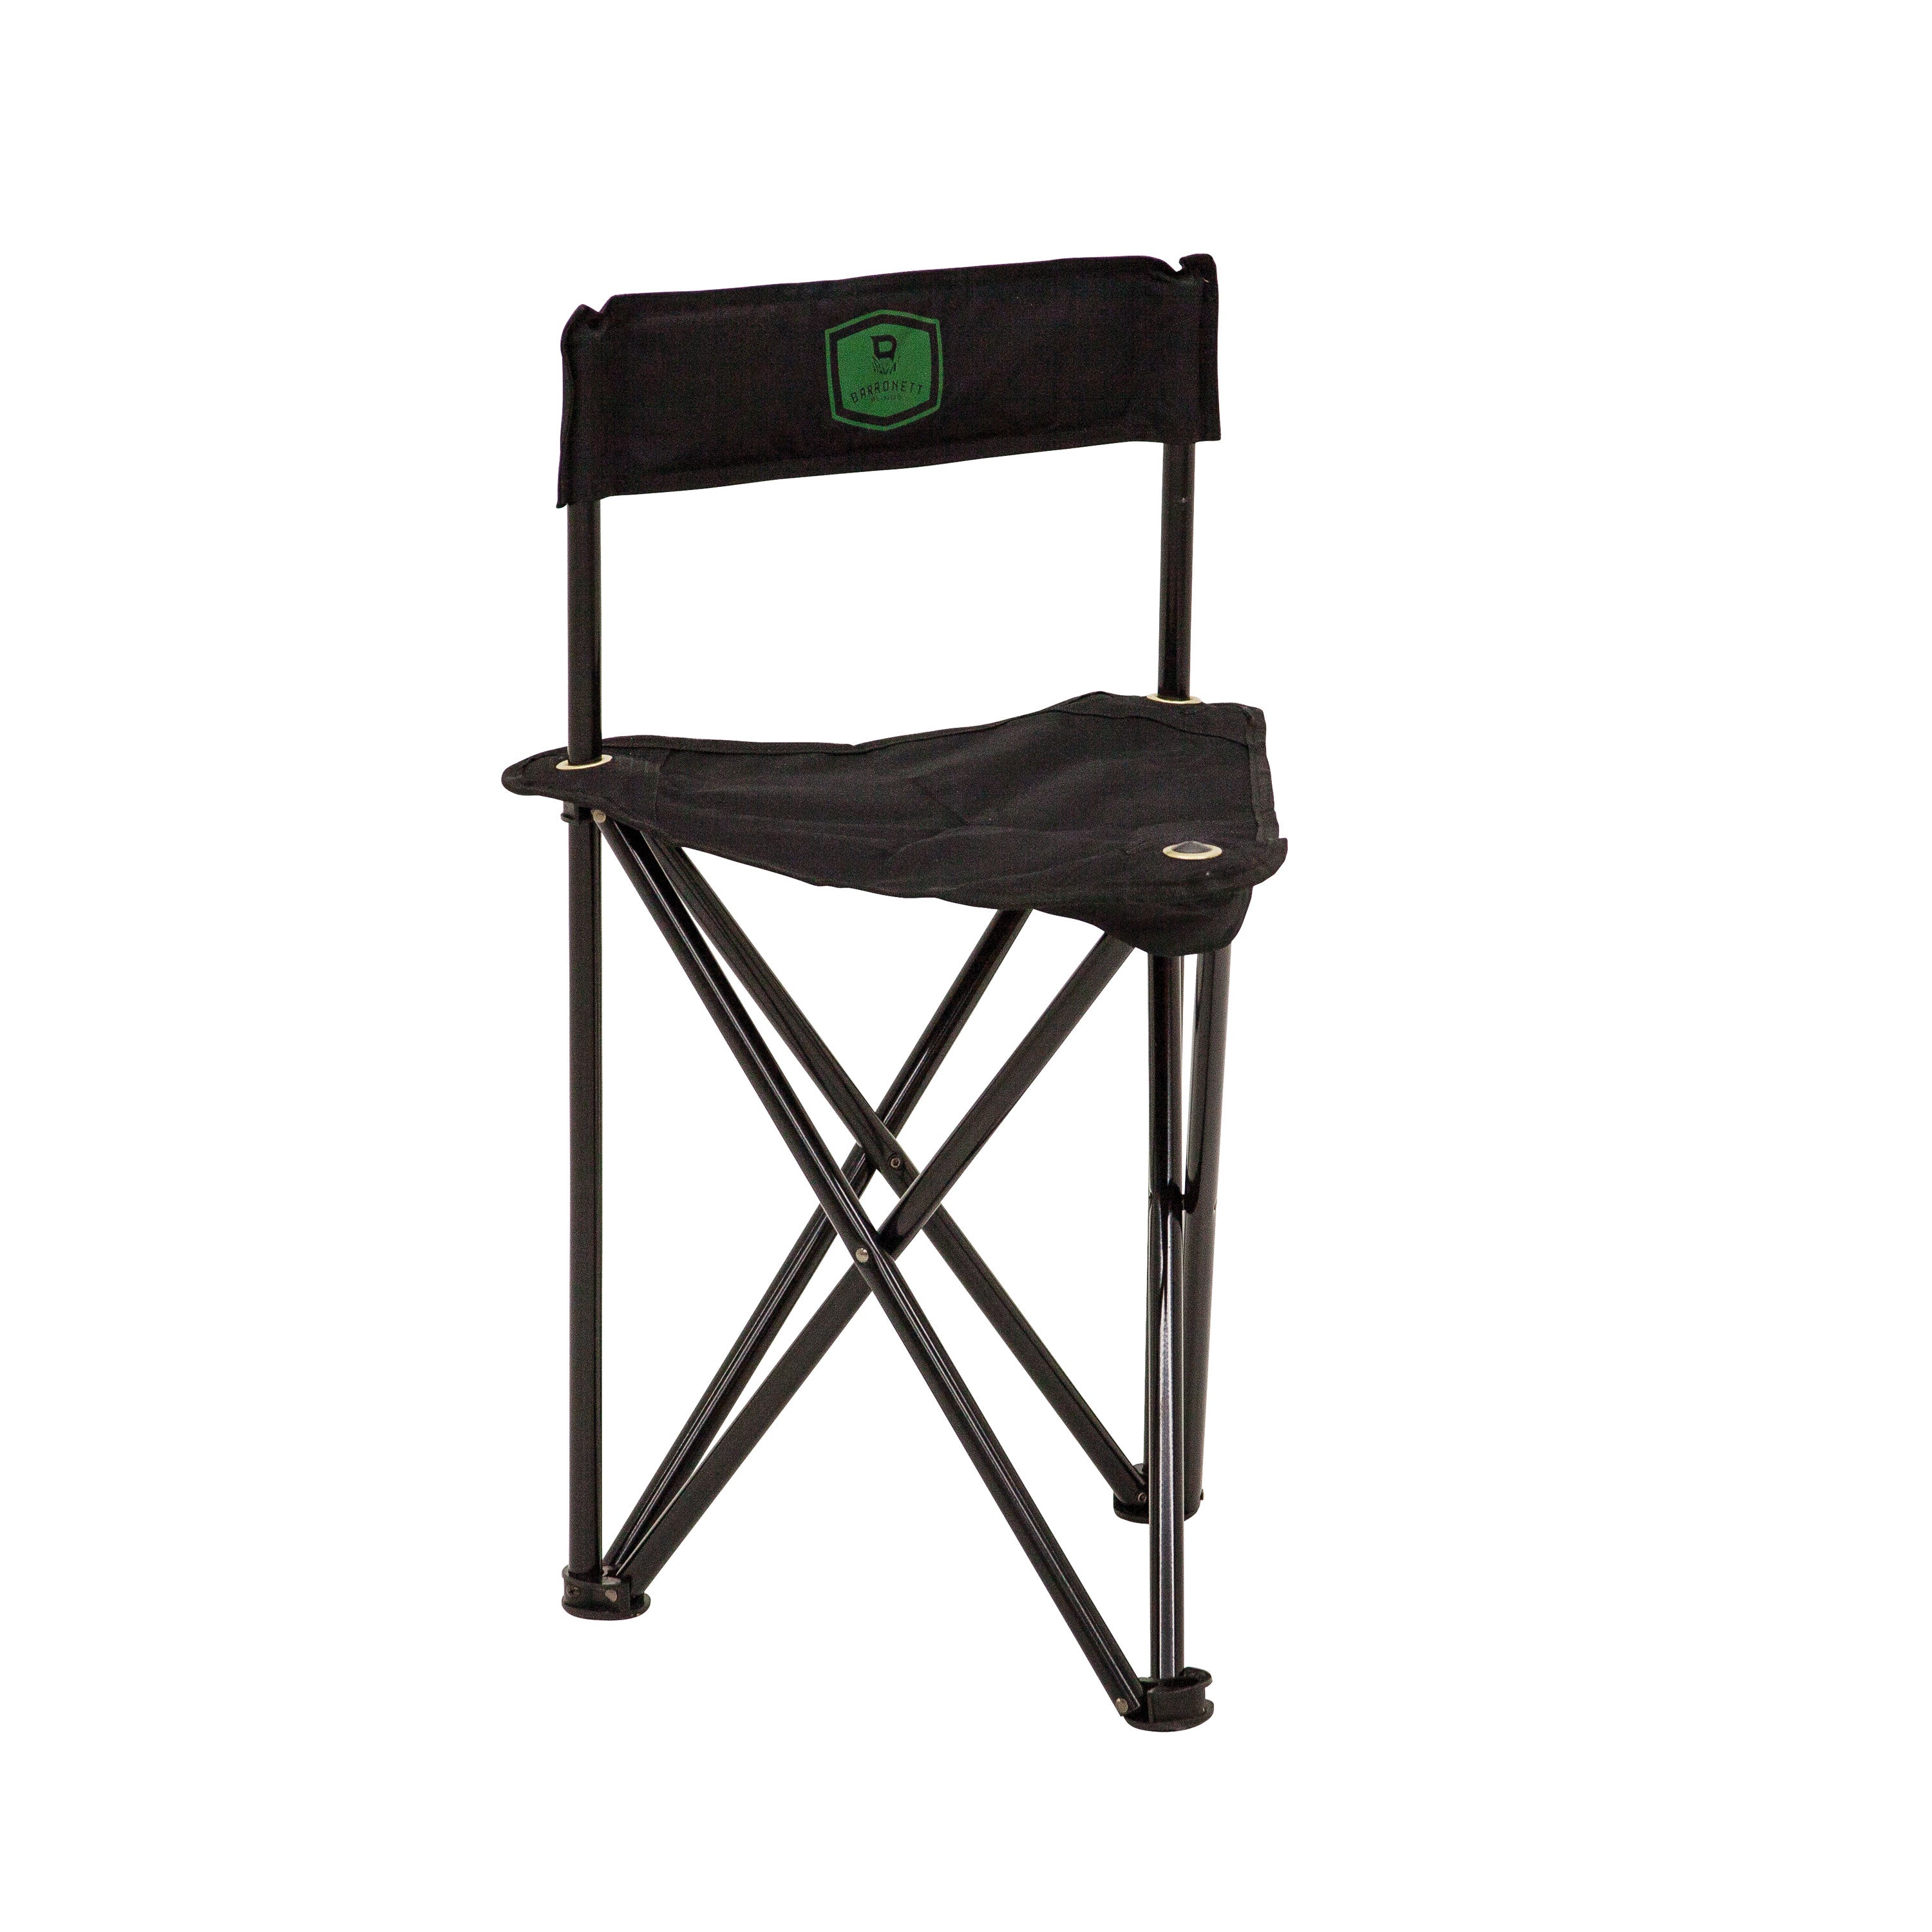 Ameristep Portable Folding Design Hunting Lightweight Tripod Blind Chair  with Backrest, Mossy Oak Break-Up Country AMS-AMEFT1013 - Farmstead Outdoors